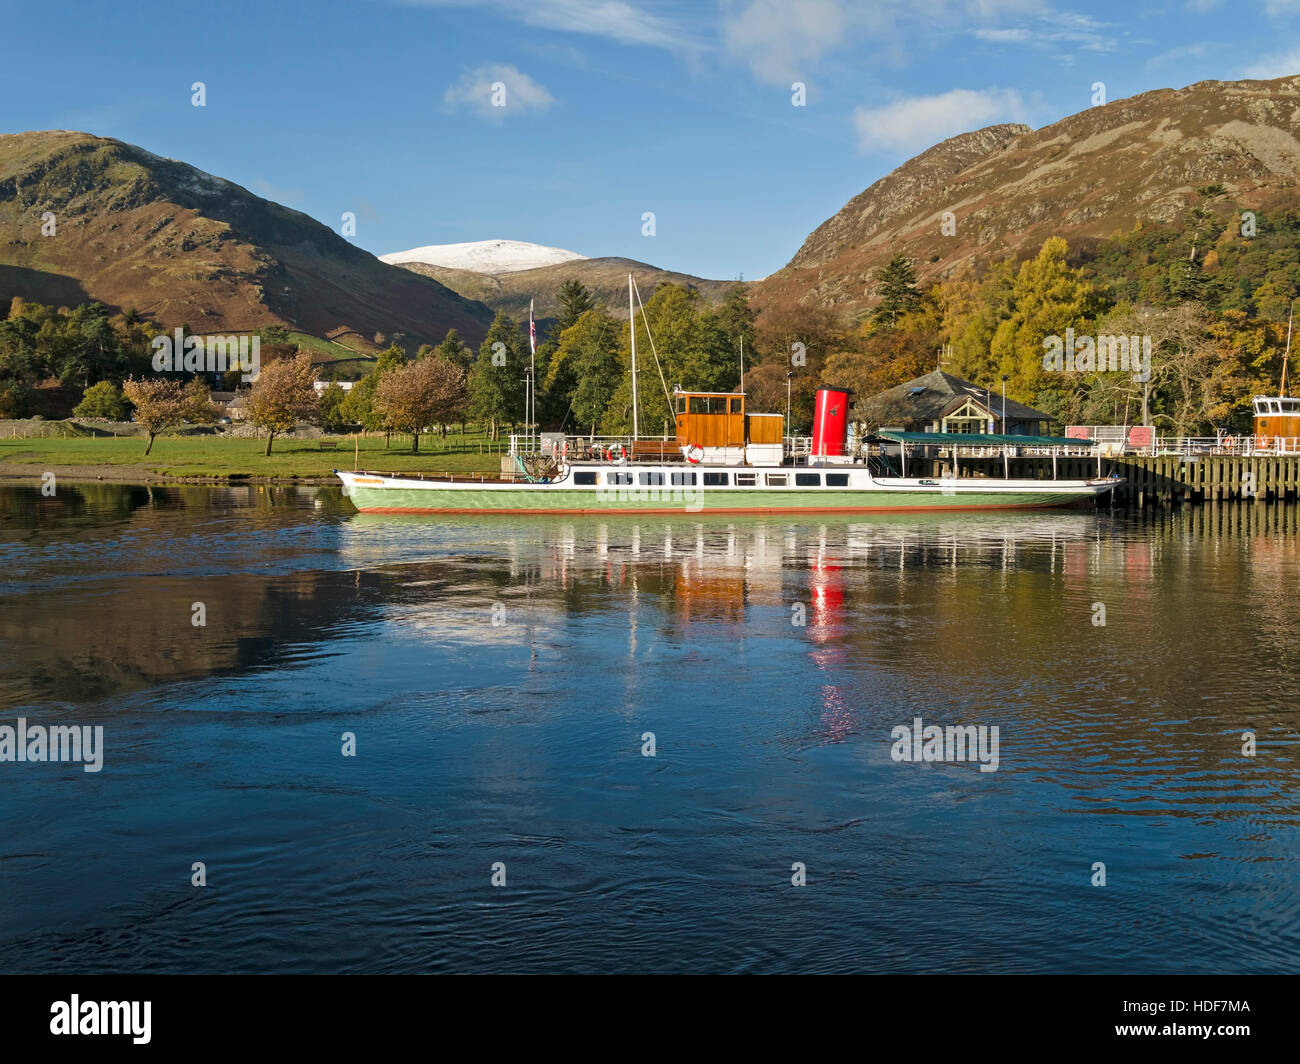 'Lady of The Lake', Ullswater 'Steamer' ferry moored at Glenridding Pier on the Ullswater Way, English Lake District, Cumbria, England, UK. Stock Photo